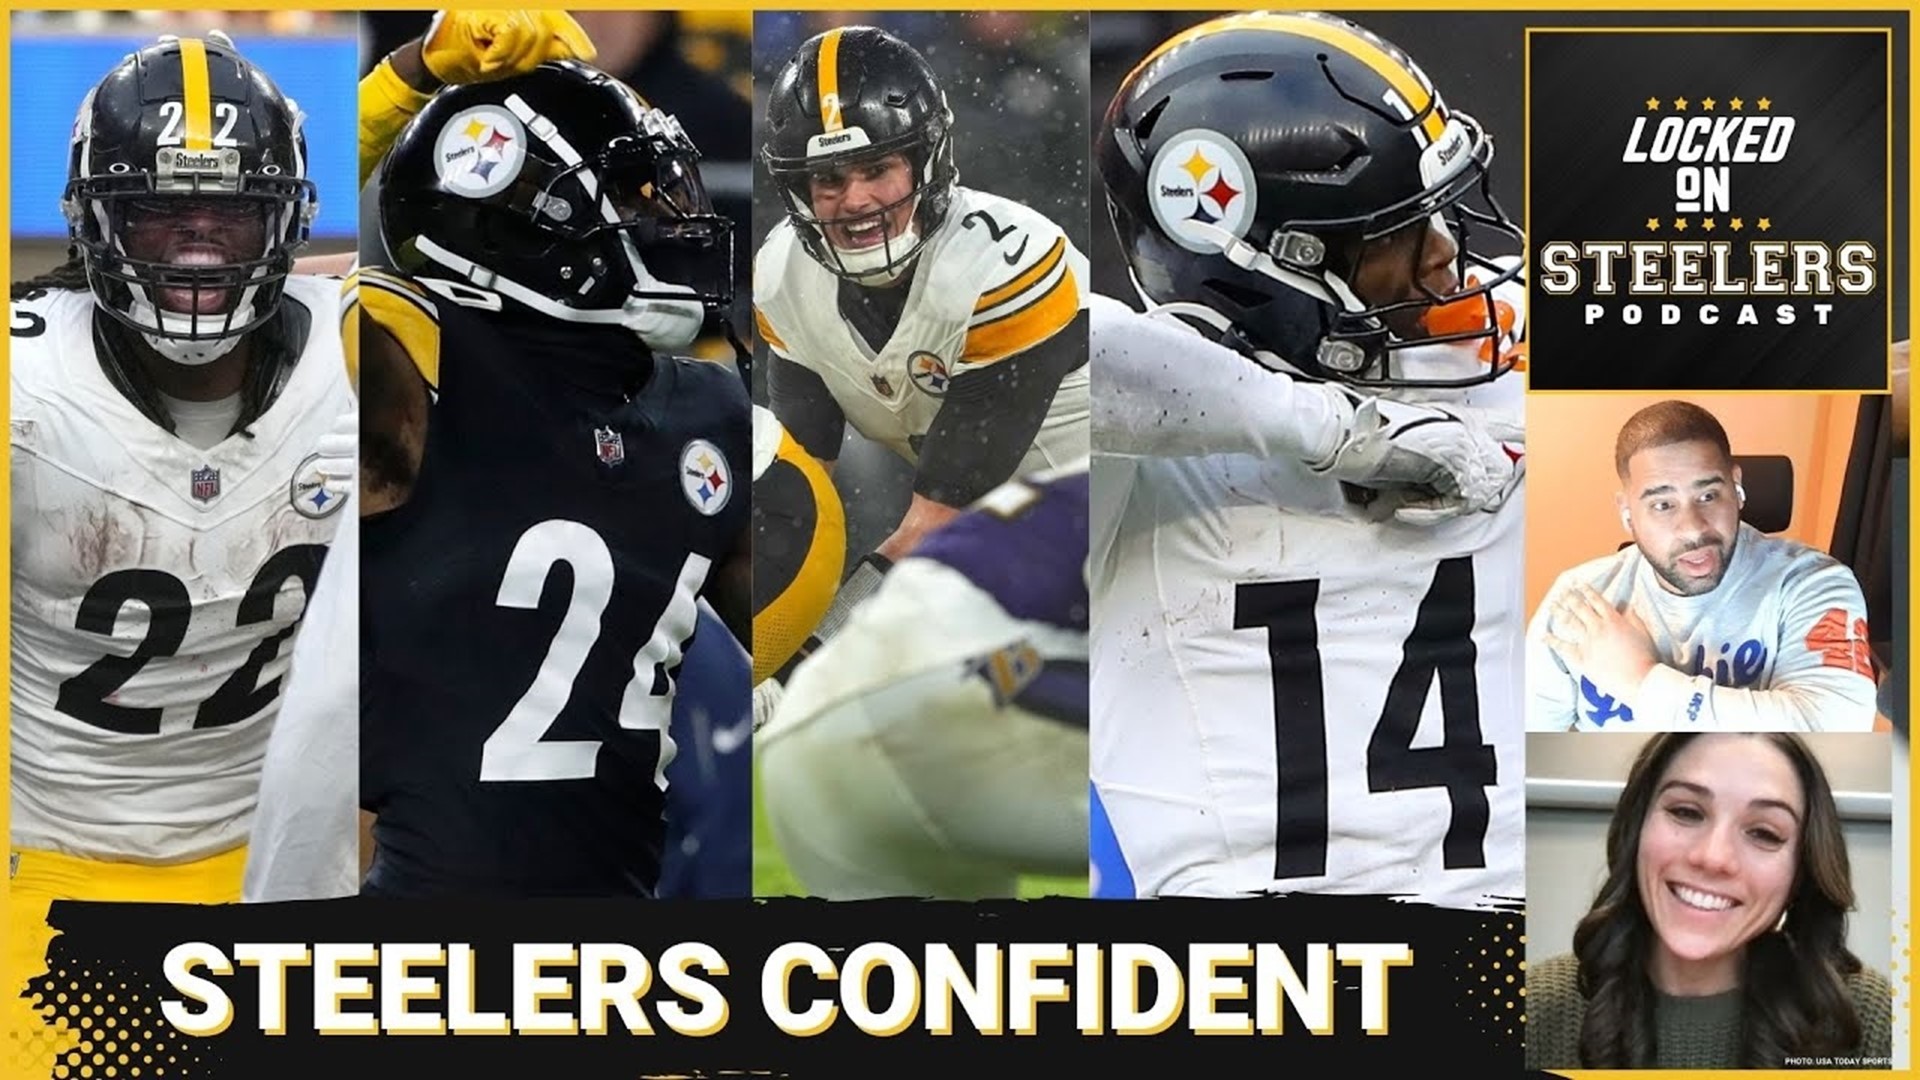 The Pittsburgh Steelers sound confident before facing the Buffalo Bills, and are making it known that the team is far different from the one that lost to the Chiefs.